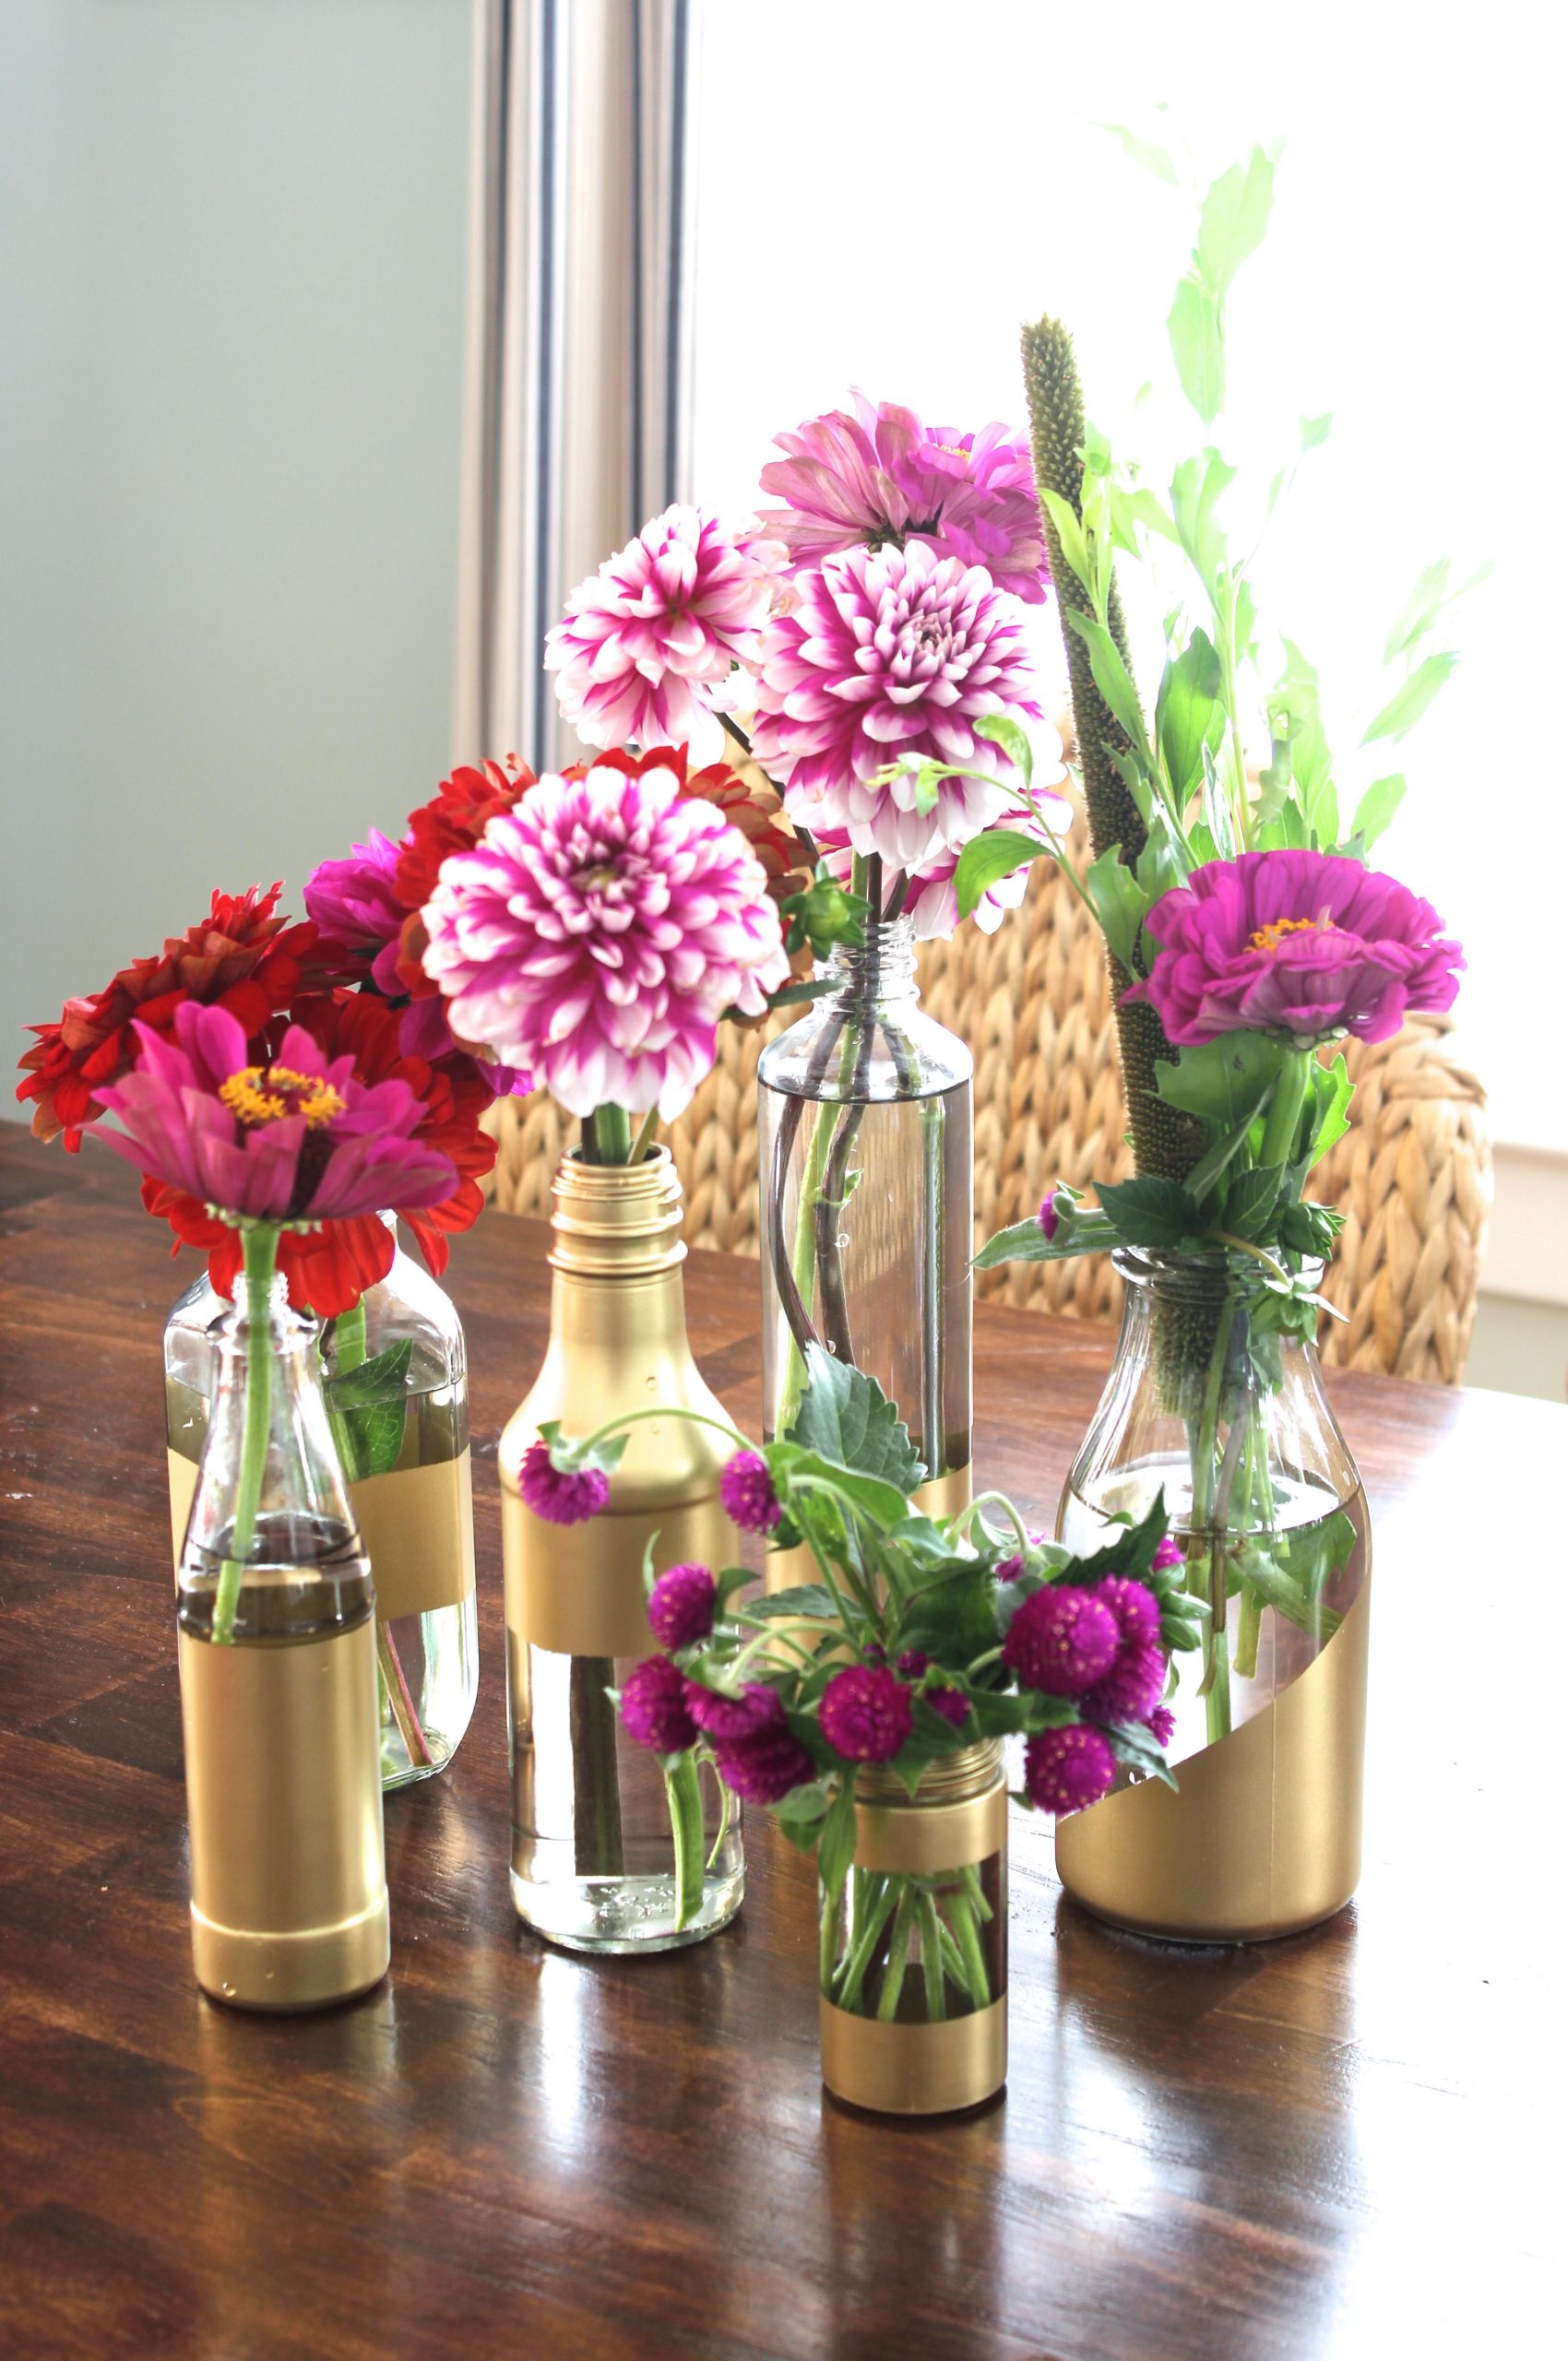 DIY Vase Decorating
 DIY Gilded Vases From Condiment Bottles Simple Stylings